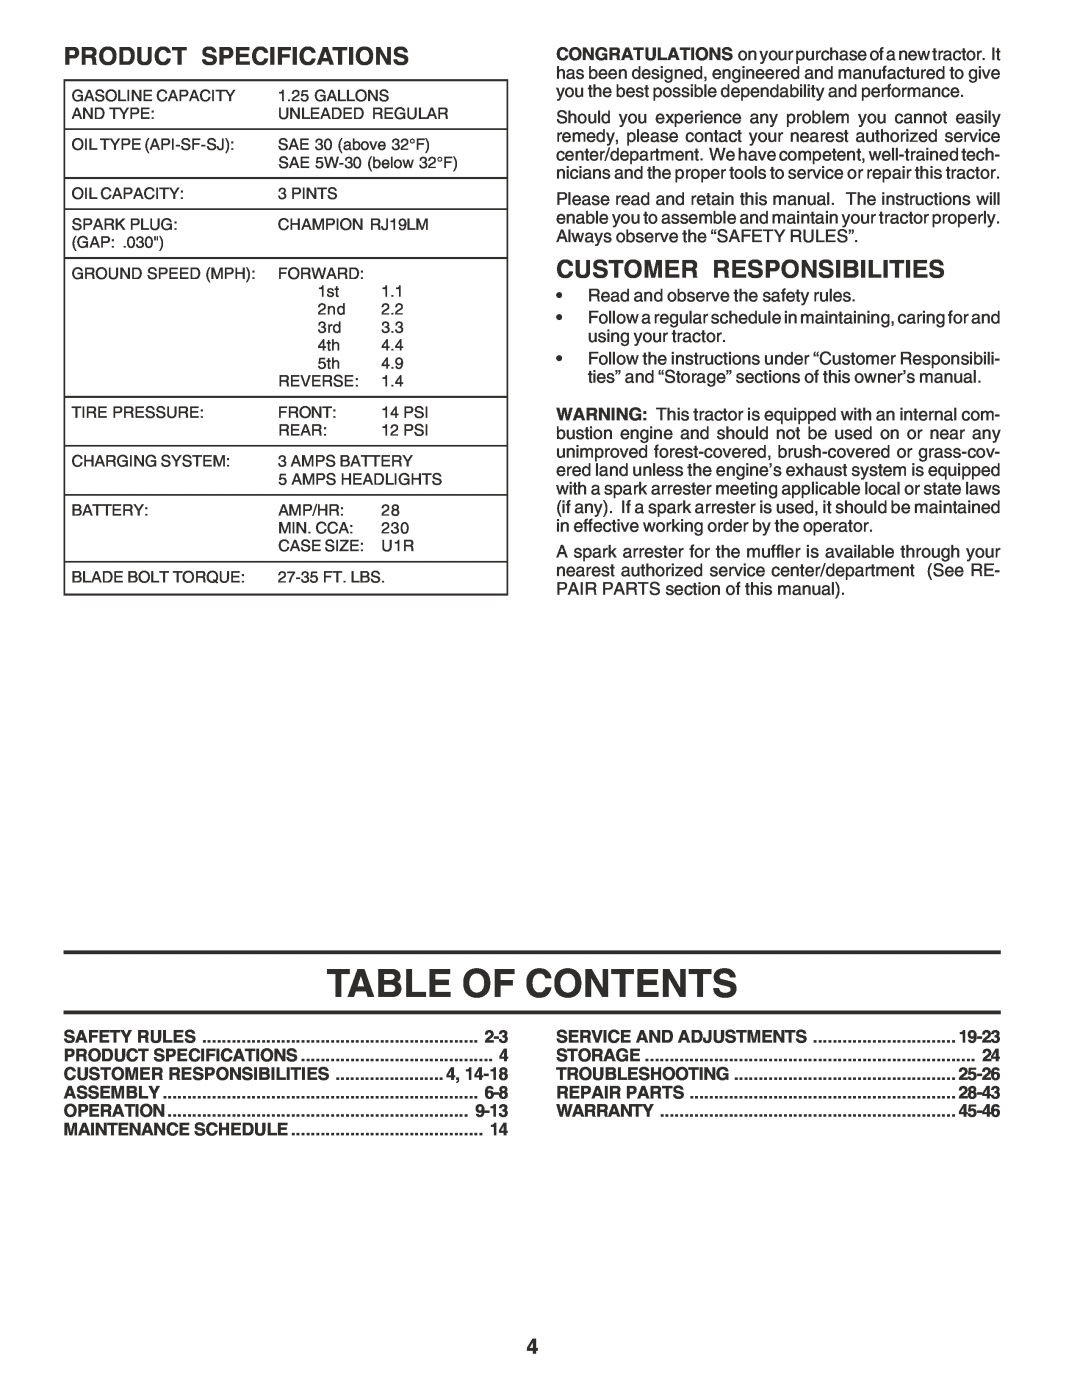 Weed Eater WE12538L manual Table Of Contents, Product Specifications, Customer Responsibilities 